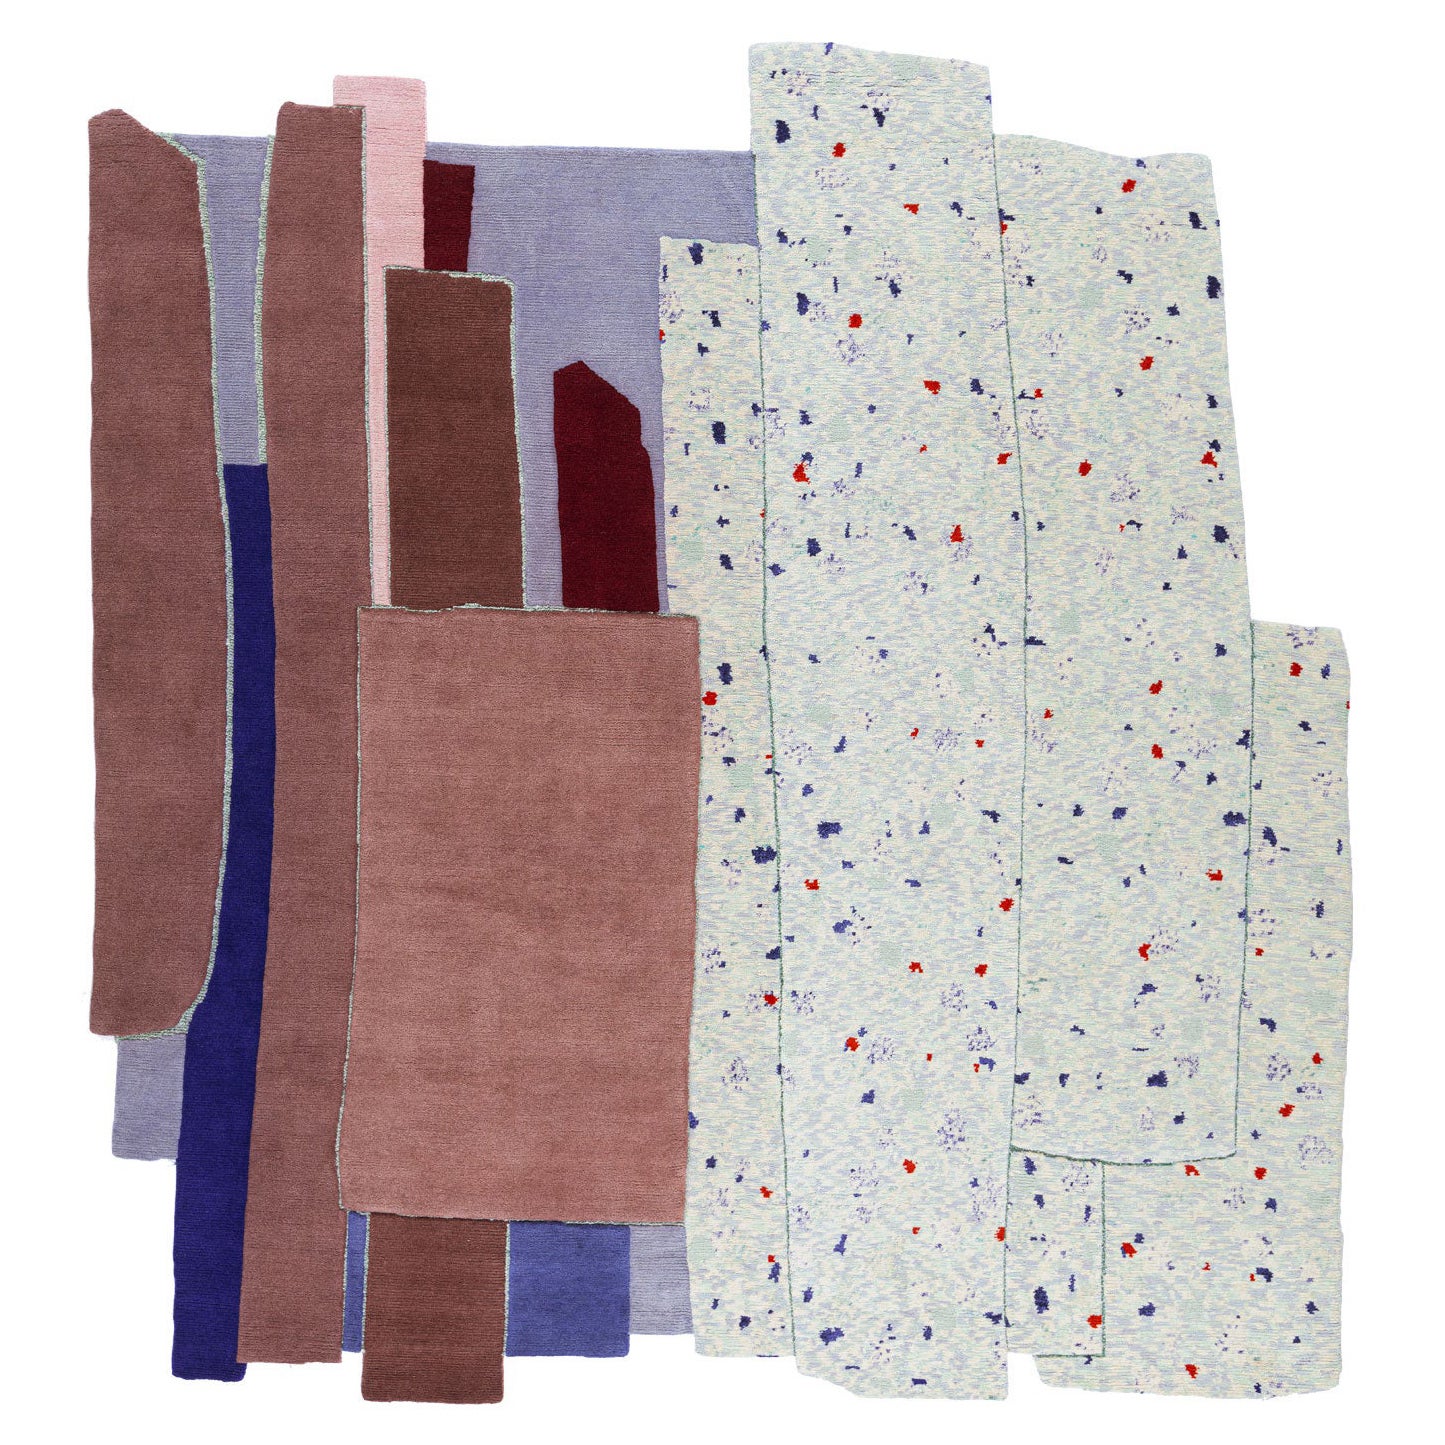 Gesture cc-tapis Patcha Square Handmade Rug in Burgundy by Patricia Urquiola